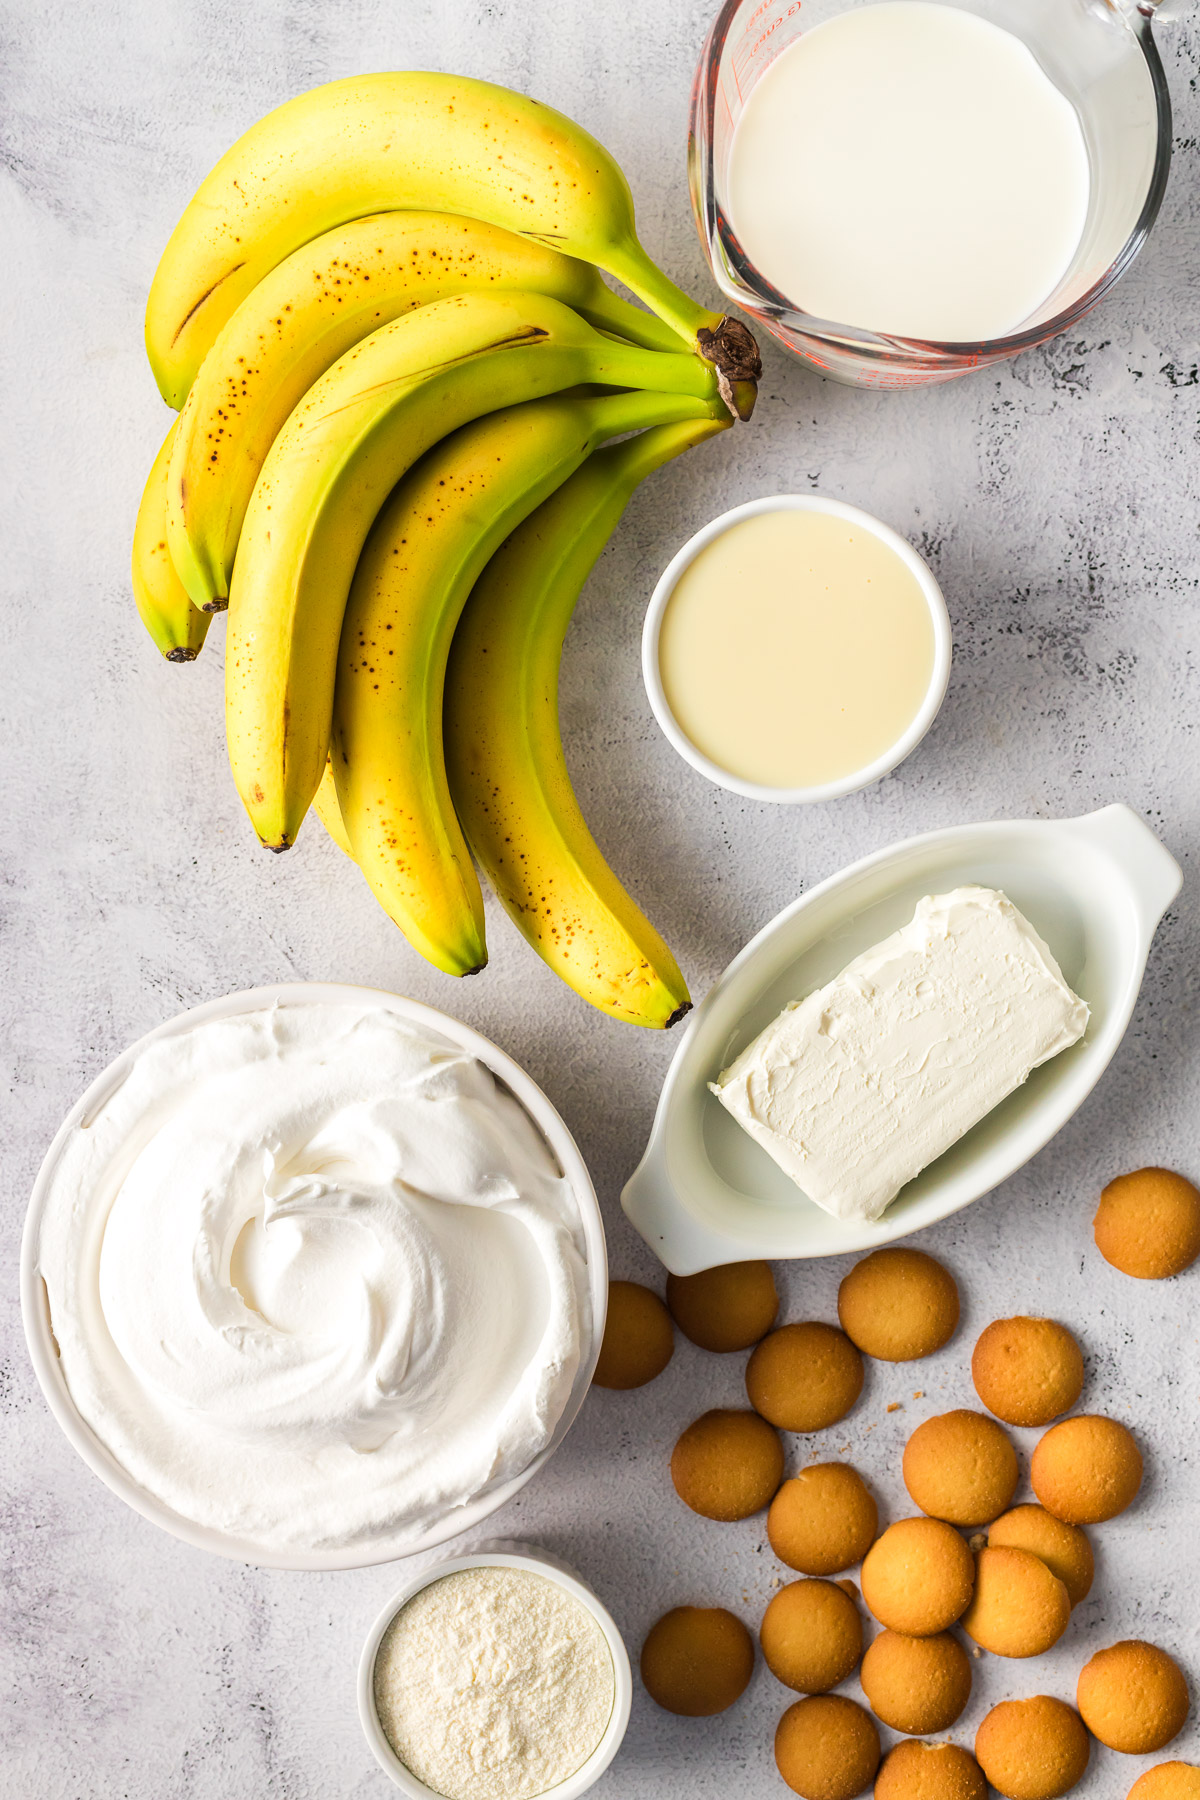 ingredients for banana pudding - bananas, cool whip, Nilla wafers, cream cheese, and sweetened condensed milk